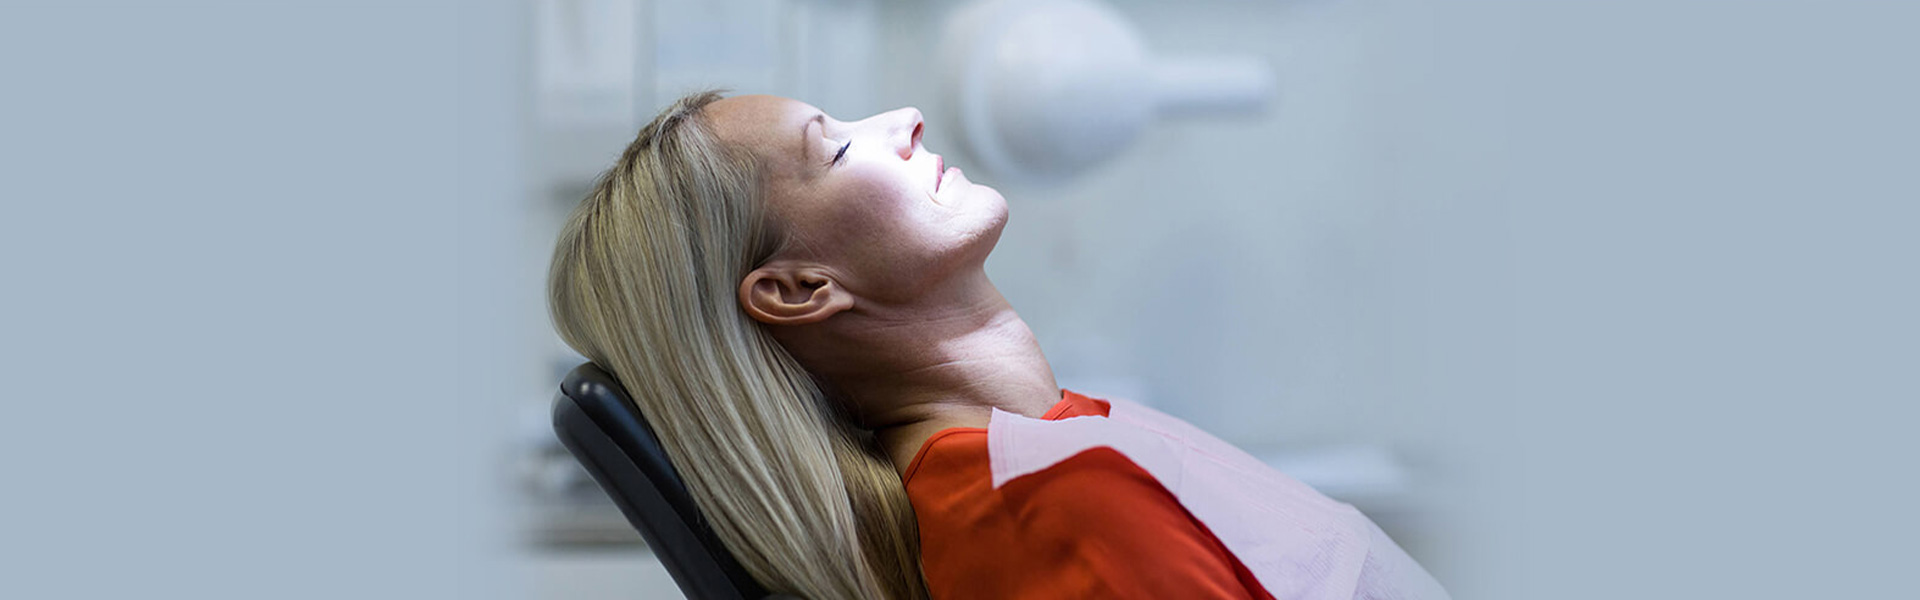 Why Sleep Dentistry Is Ideal During Your Dental Appointments